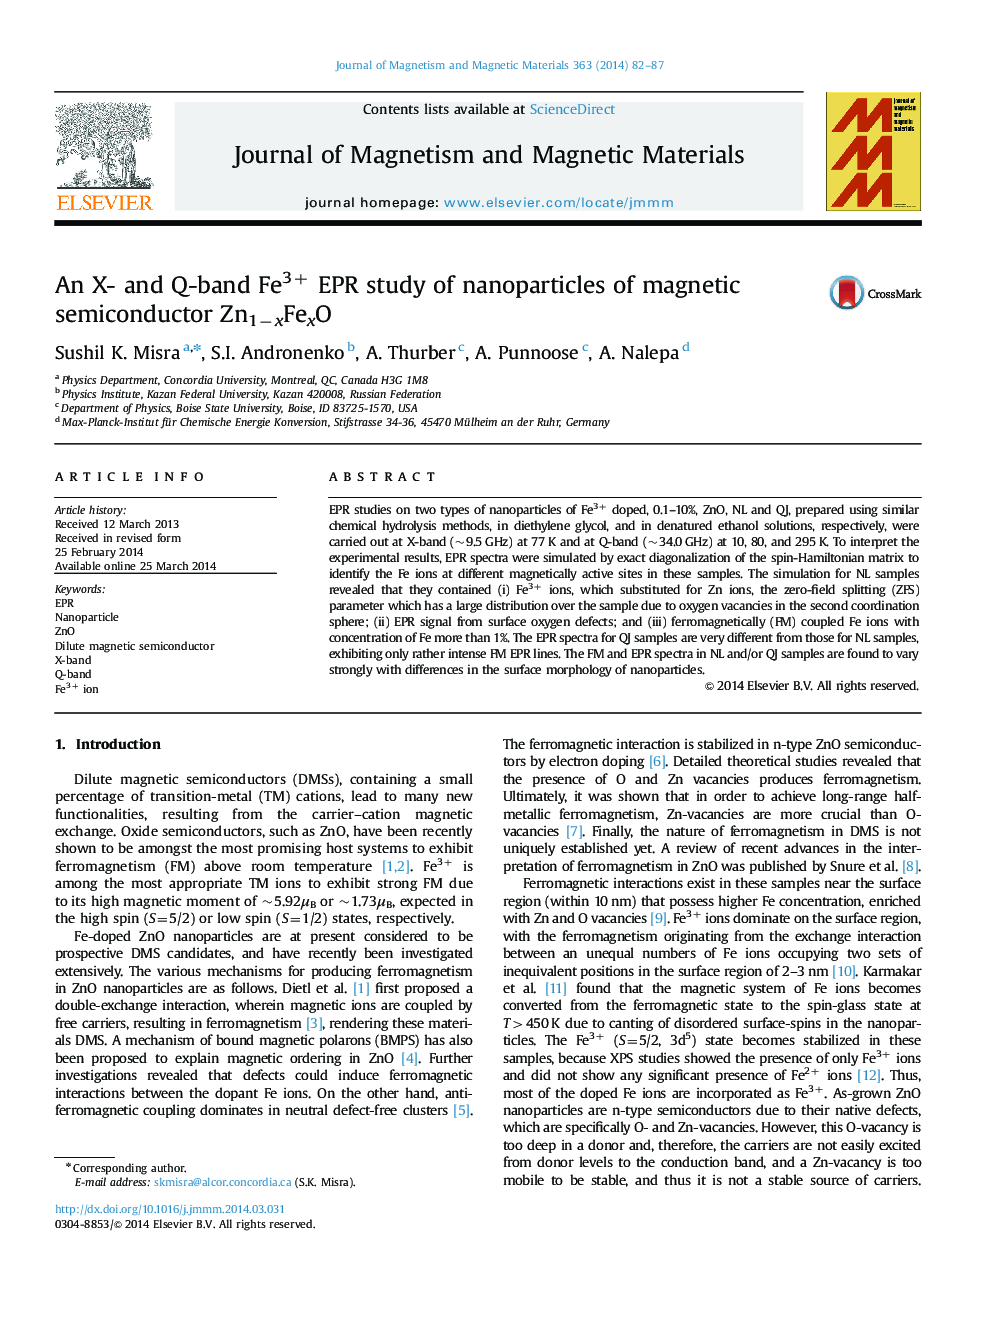 An X- and Q-band Fe3+ EPR study of nanoparticles of magnetic semiconductor Zn1−xFexO